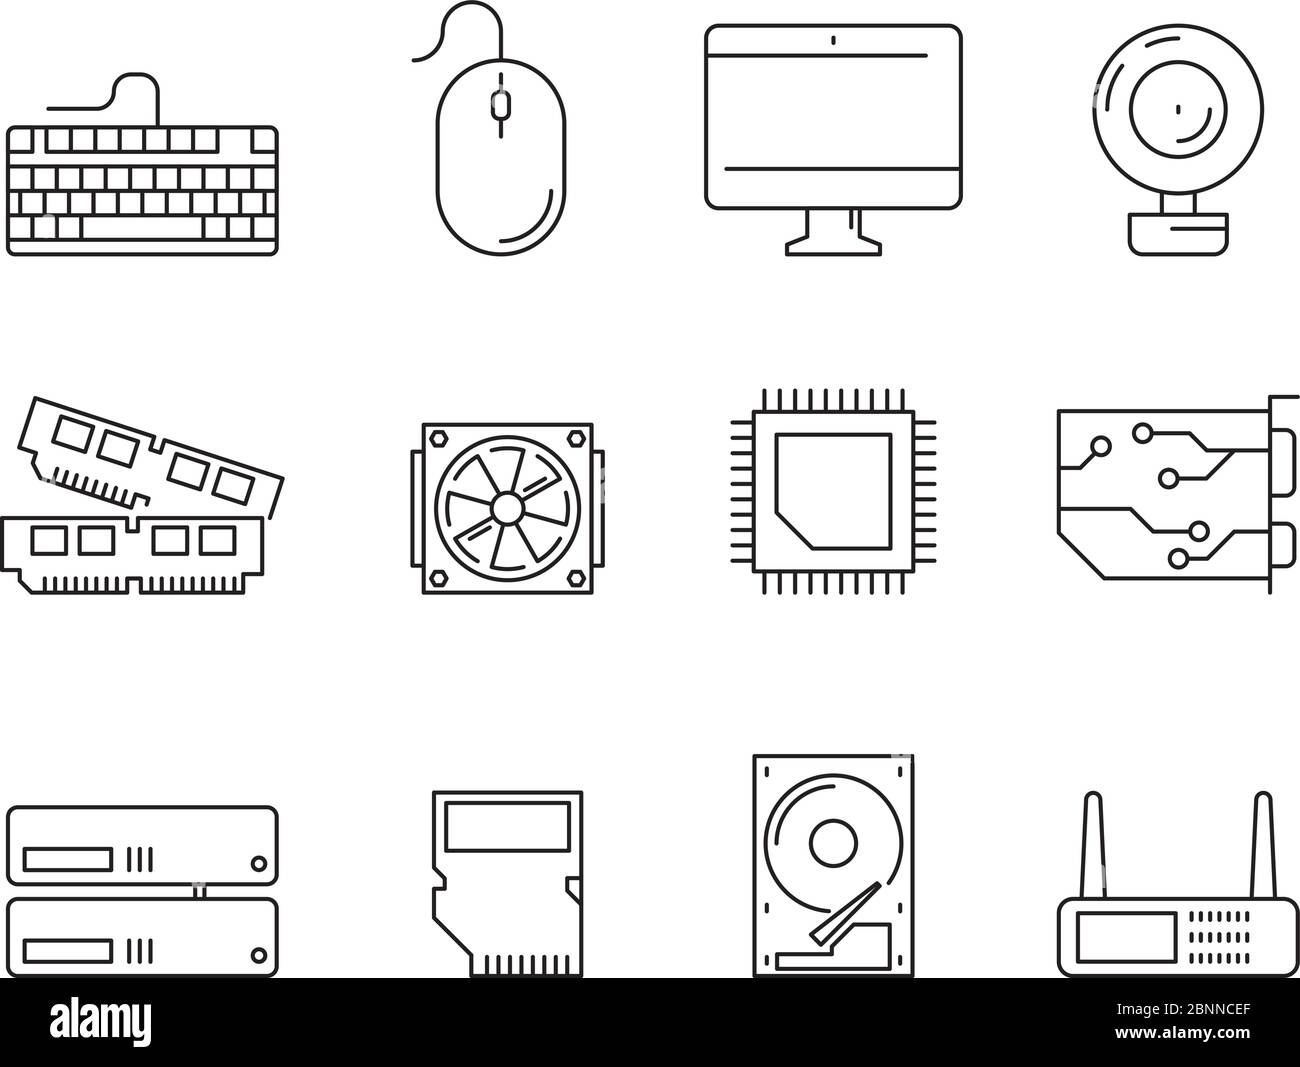 Pc components icons. Processor ssd cpu power adapter ram memory and hdd linear vector symbols isolated Stock Vector